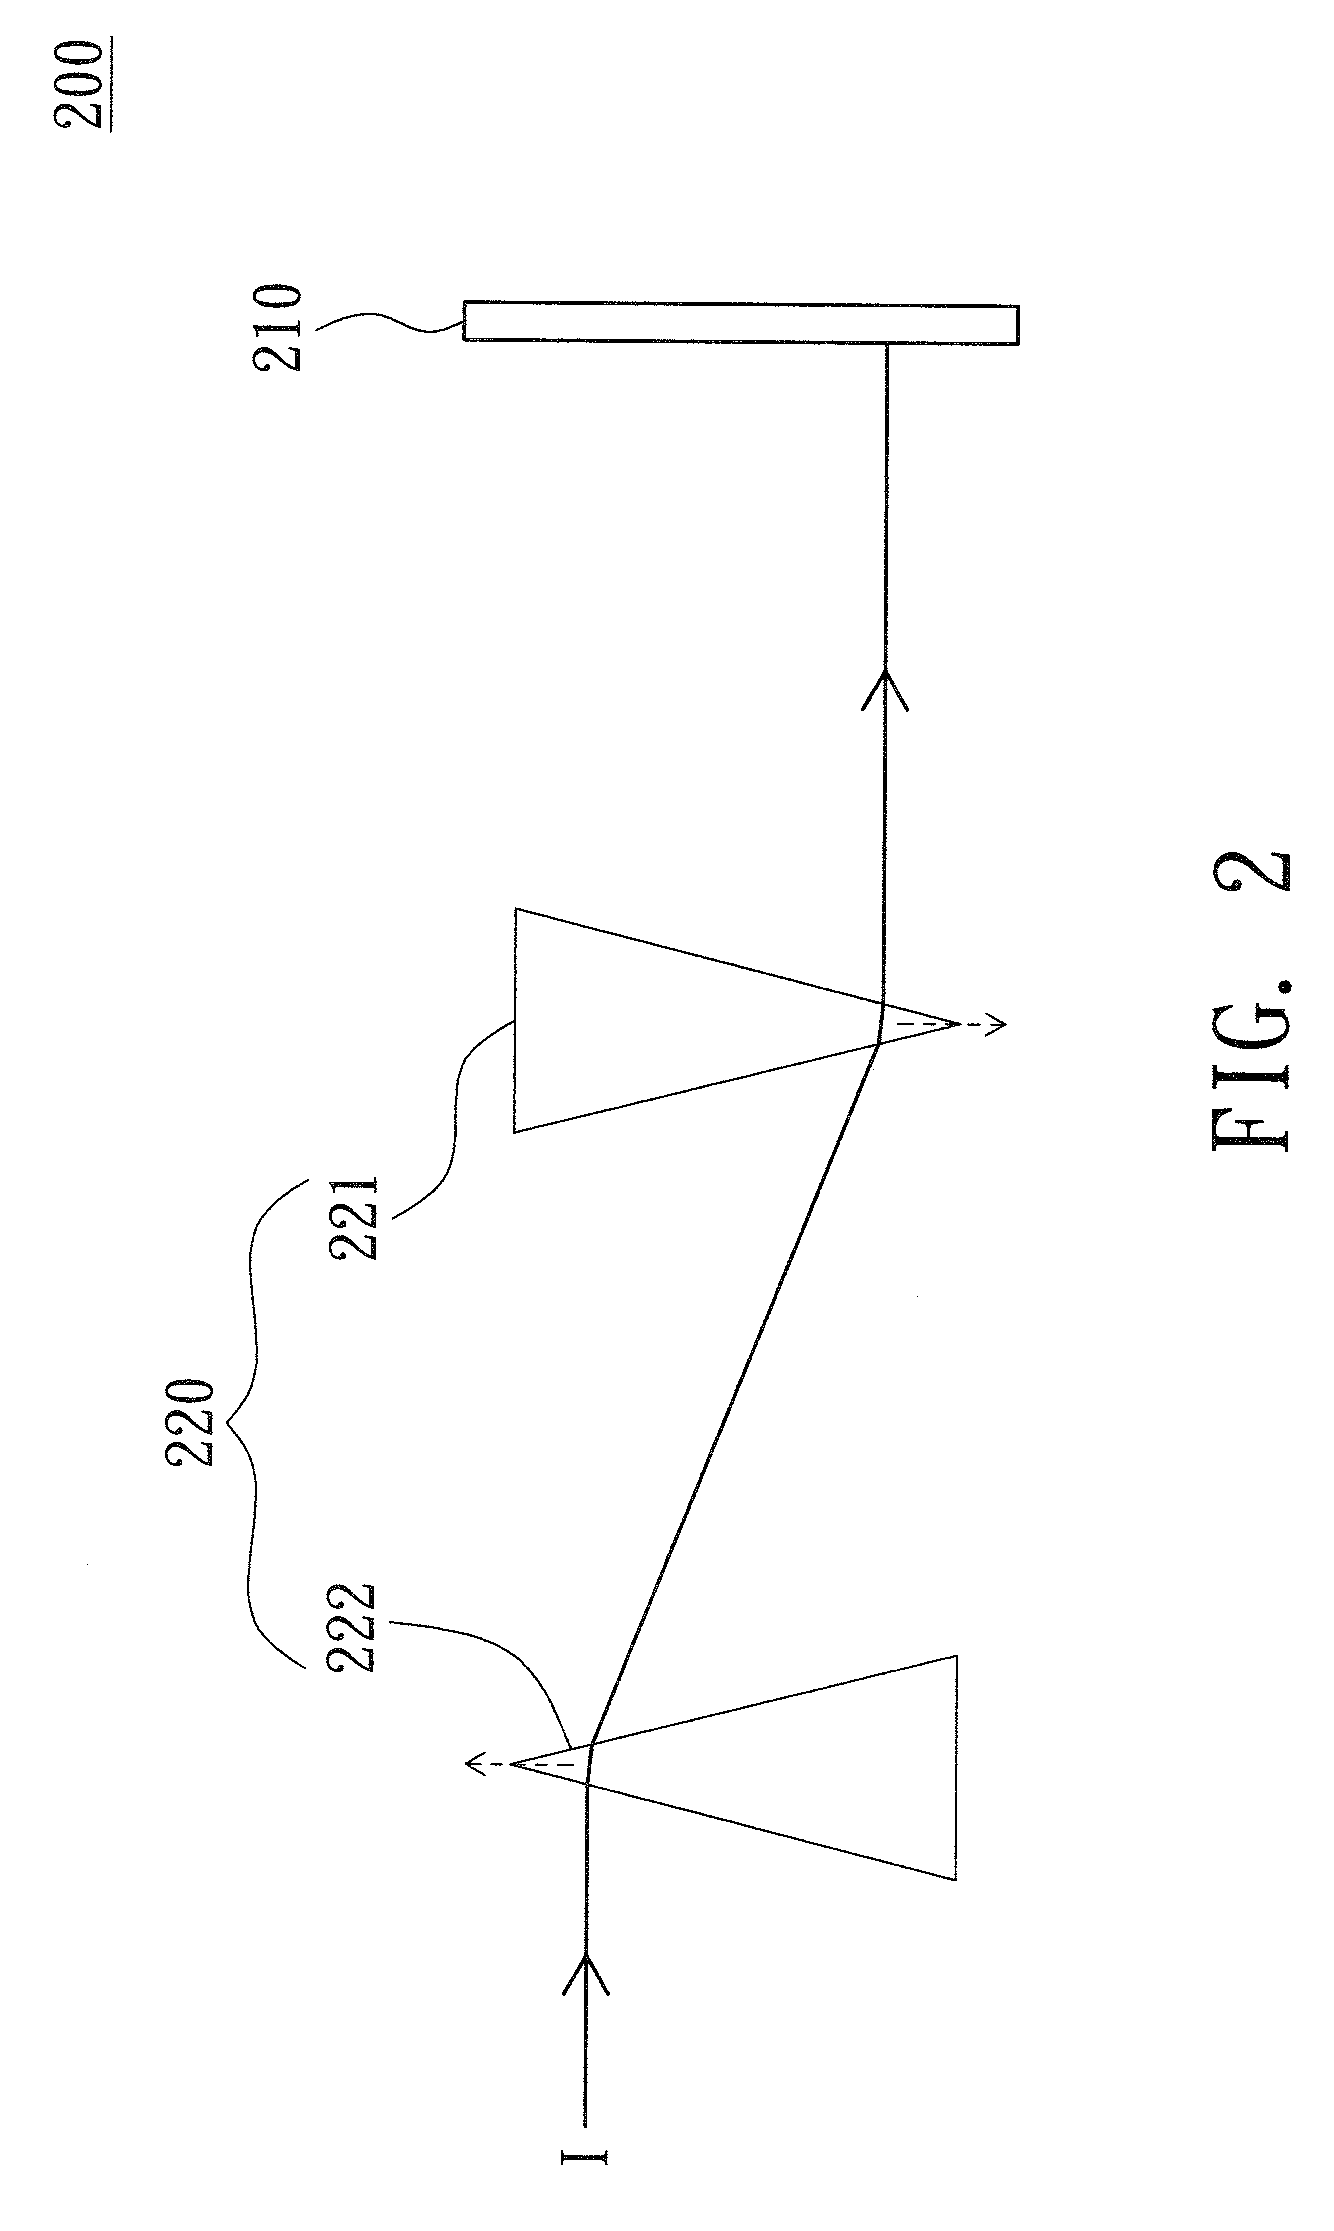 Imaging apparatus with resolution adjustability